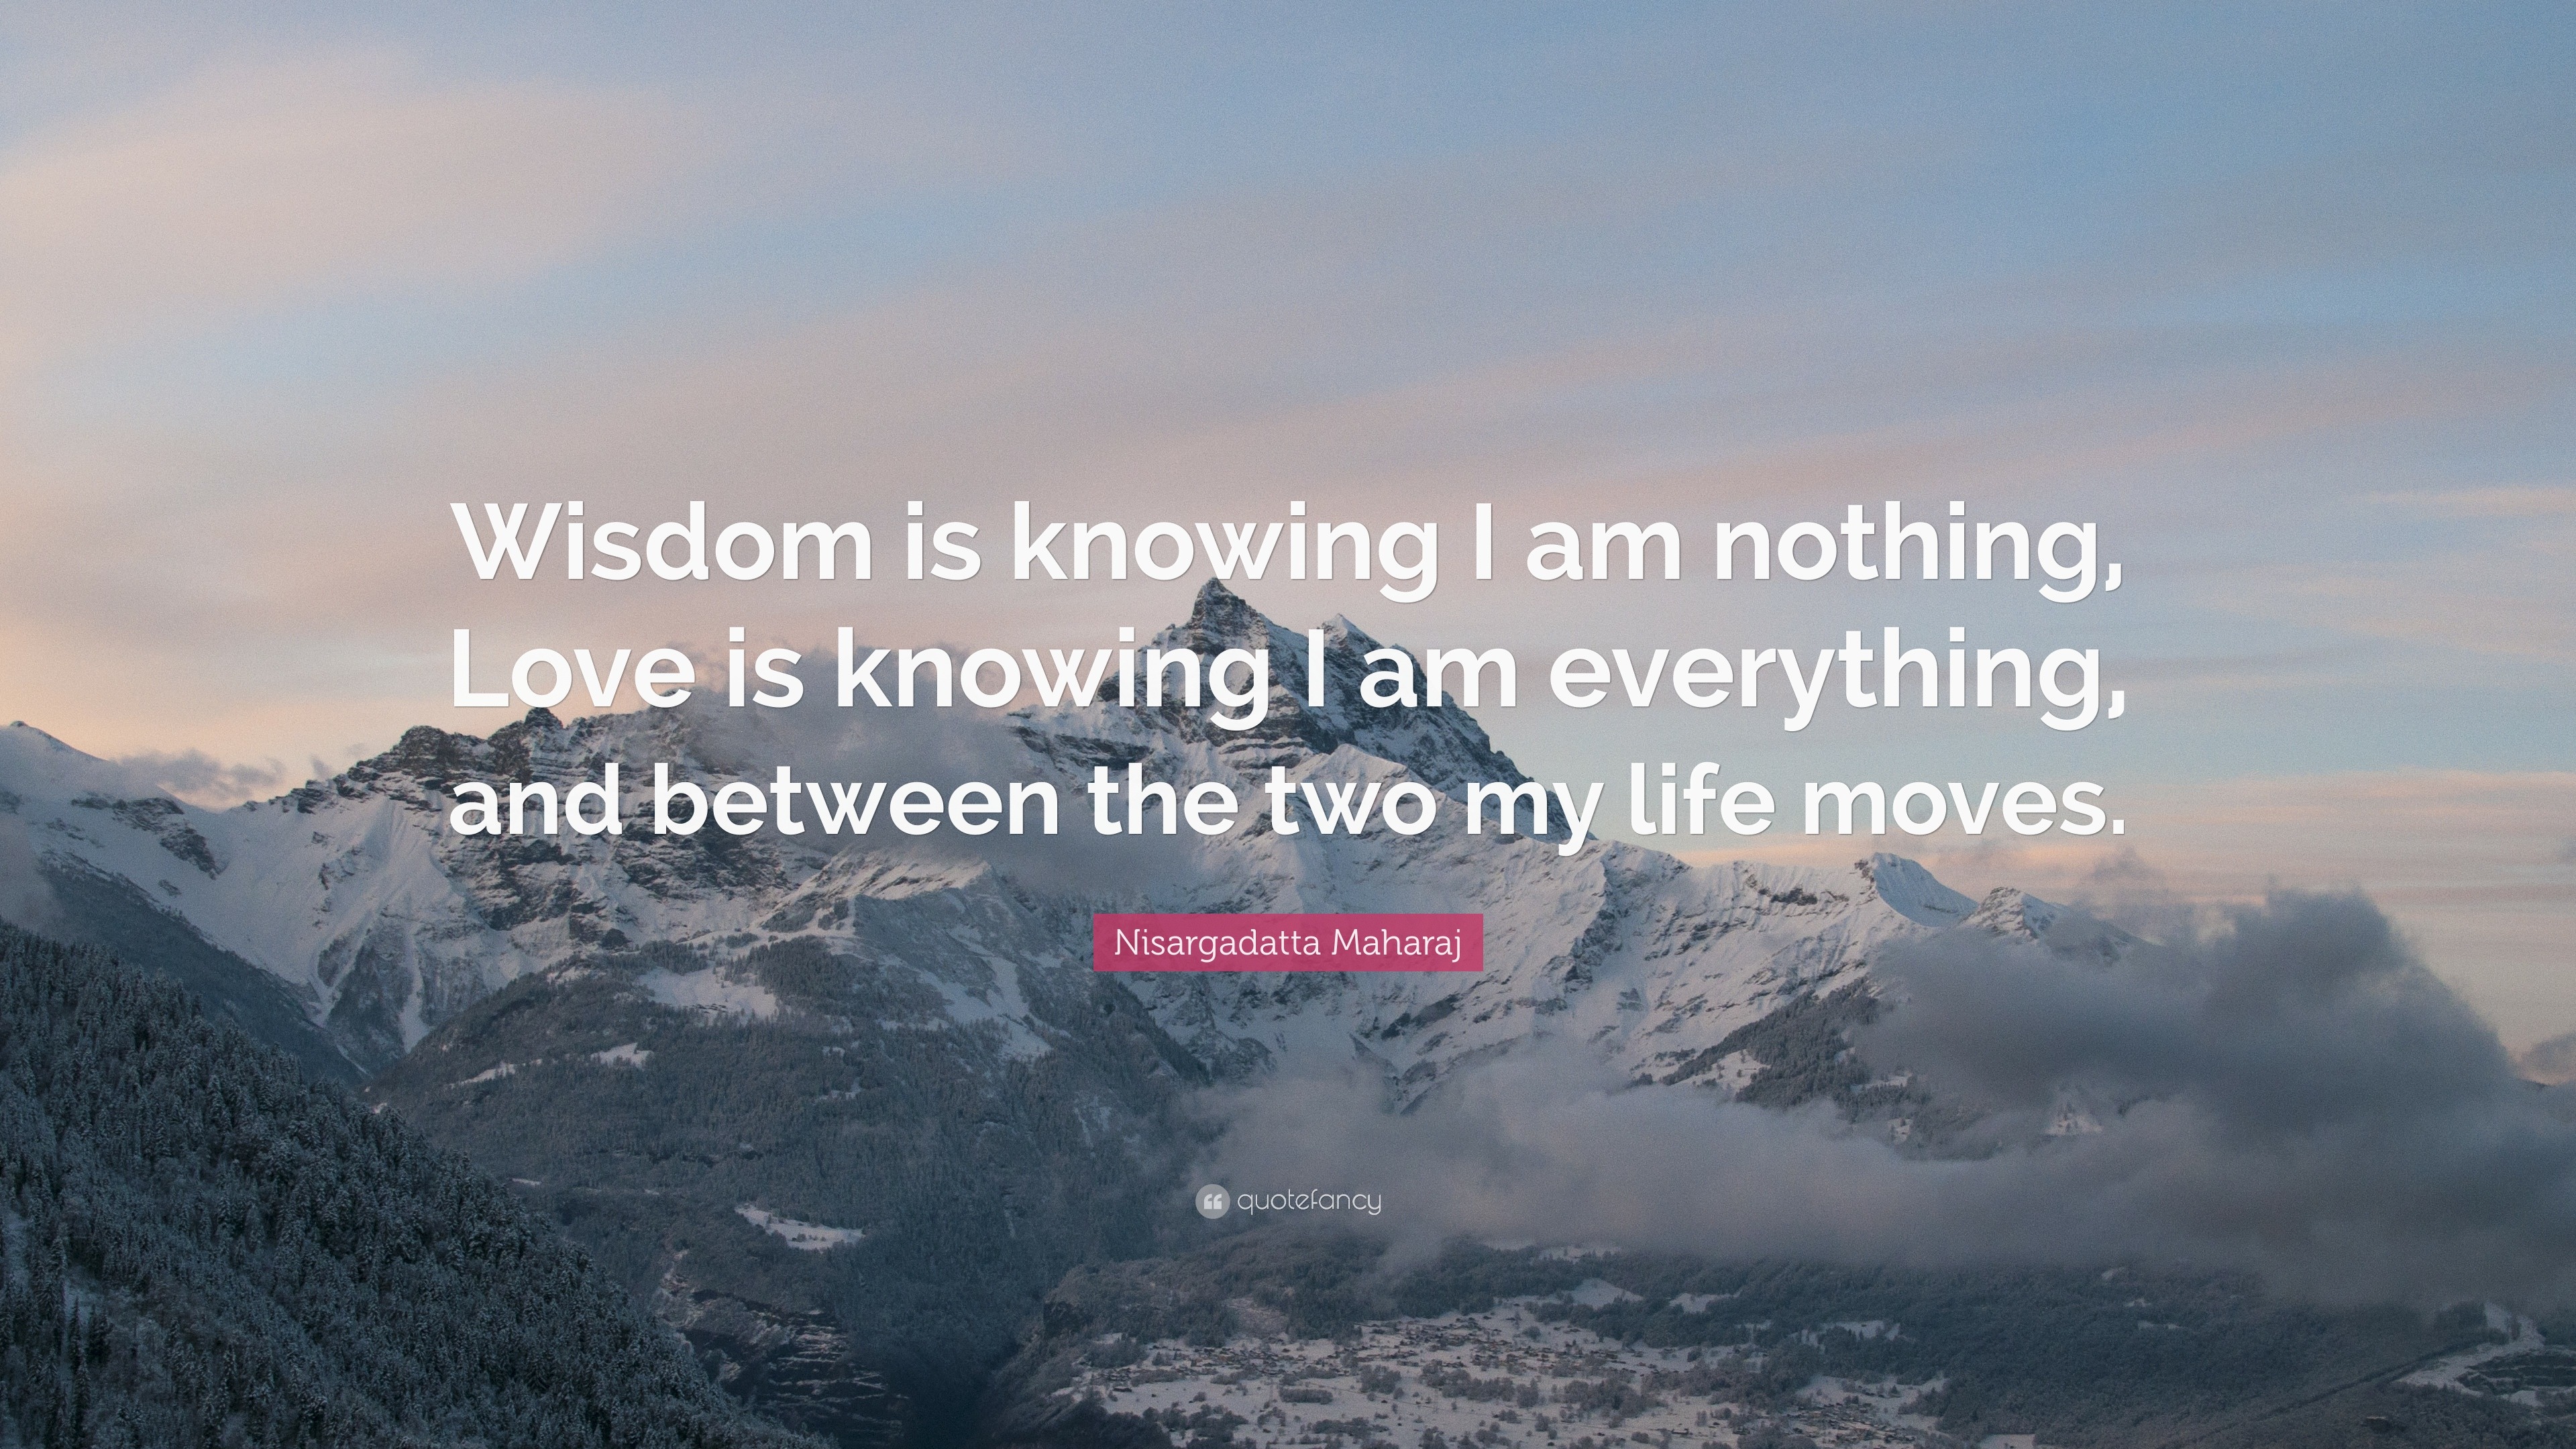 Nisargadatta Maharaj Quote: “Wisdom is knowing I am nothing, Love is ...